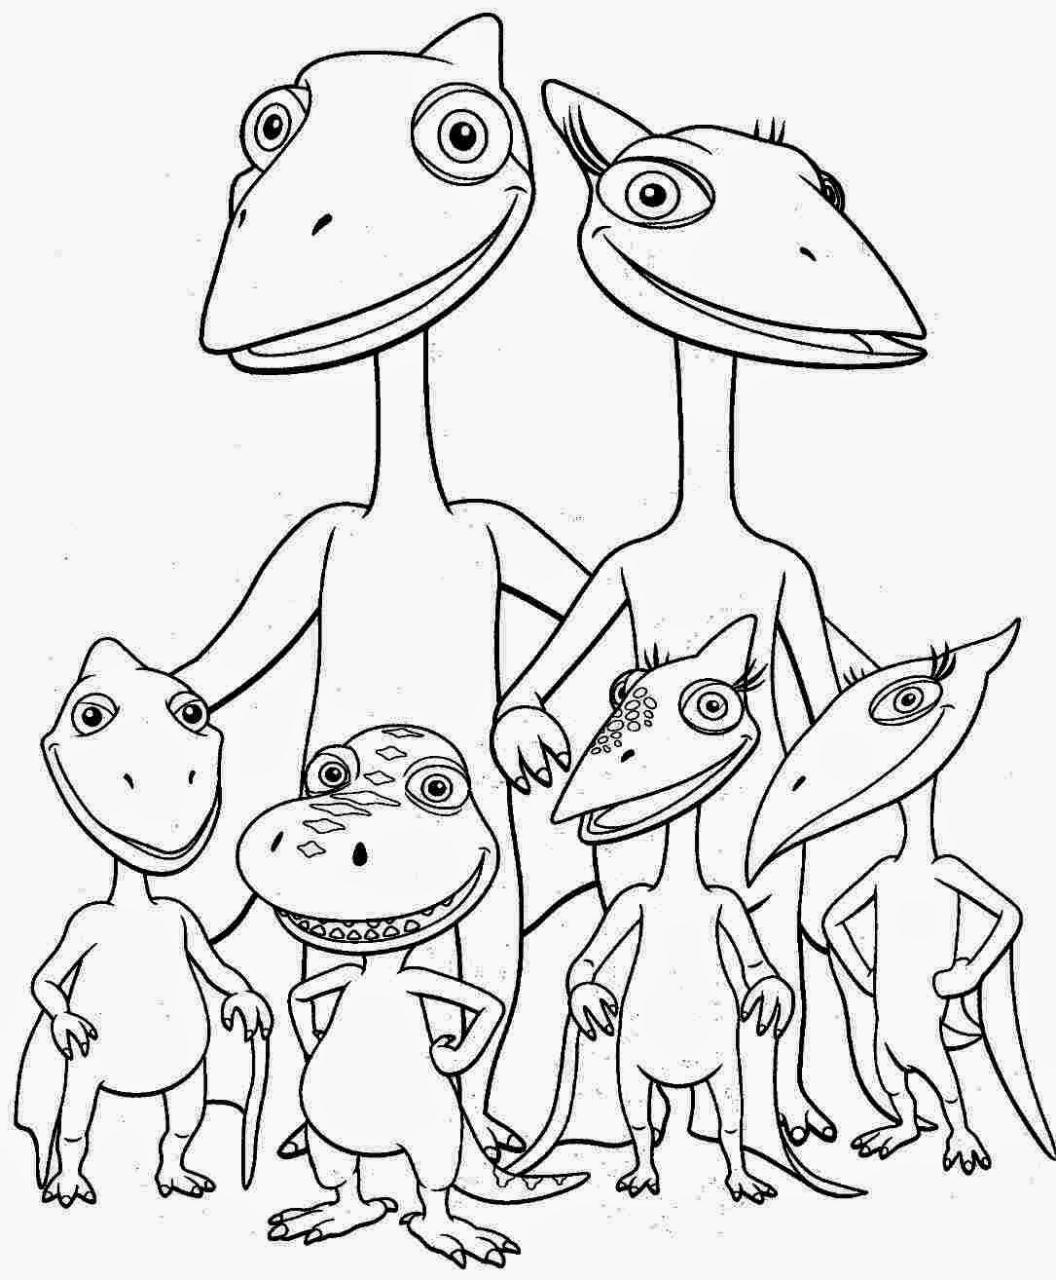 List Of Dinosaur Coloring Pages References